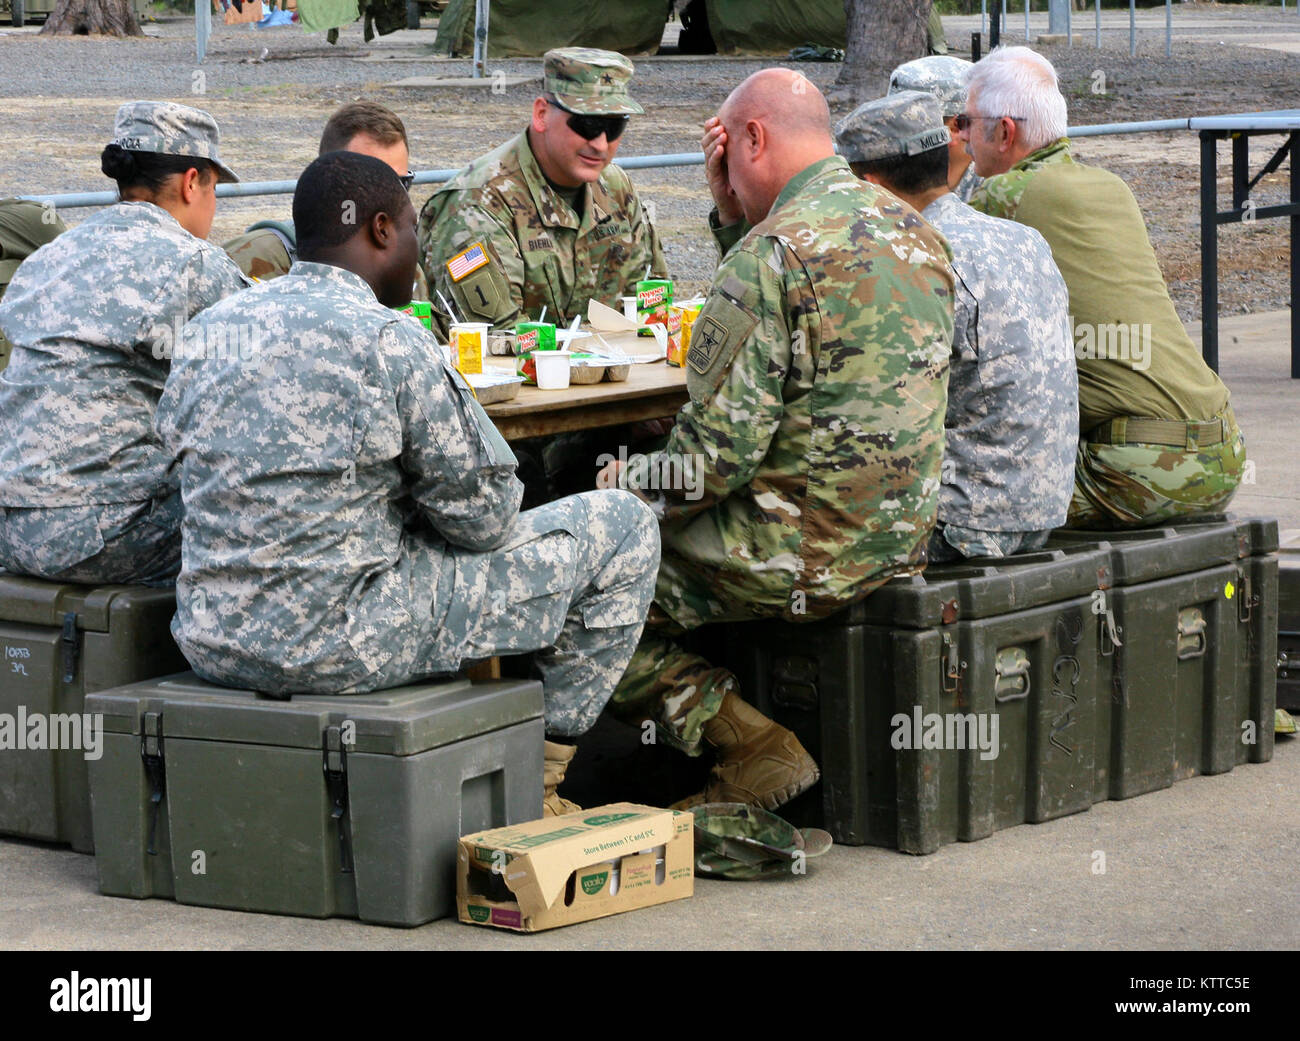 SHOALWATER BAY, Queensland, Australia – Brig. Gen. Joseph Biehler, the 42nd Infantry Division deputy commander takes time out of his busy schedule to eat chow with 27th Infantry Brigade Combat Team Soldiers during a tour of camp Samuel Hill during Combined Exercise Talisman Saber, July 18. More than 700 Soldiers from the 27th IBCT traveled to Australia to participate in the week-long exercise. (U.S. Army National Guard photo by Sgt. Alexander Rector) Stock Photo